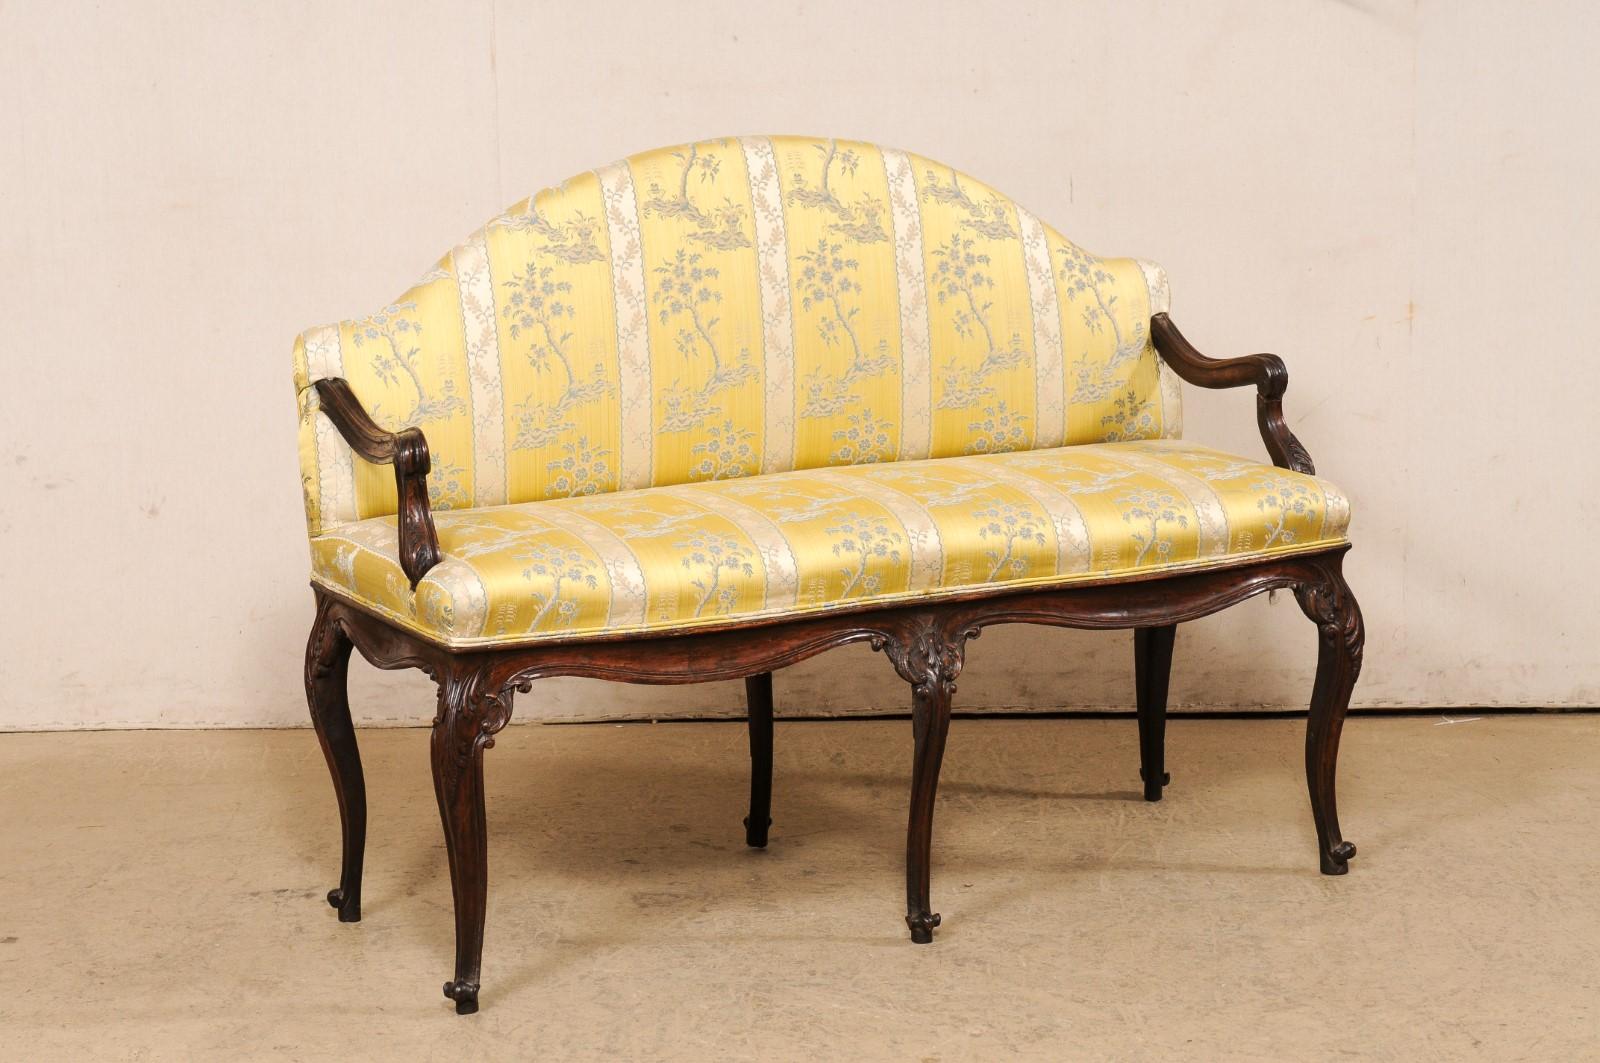 An Italian upholstered and carved-wood settee, turn of the 18th and 19th century. This sweet antique love seat from Italy features a low-profile arched back with squared shoulders, from which the nicely carved-wood arms emerge and slope down into